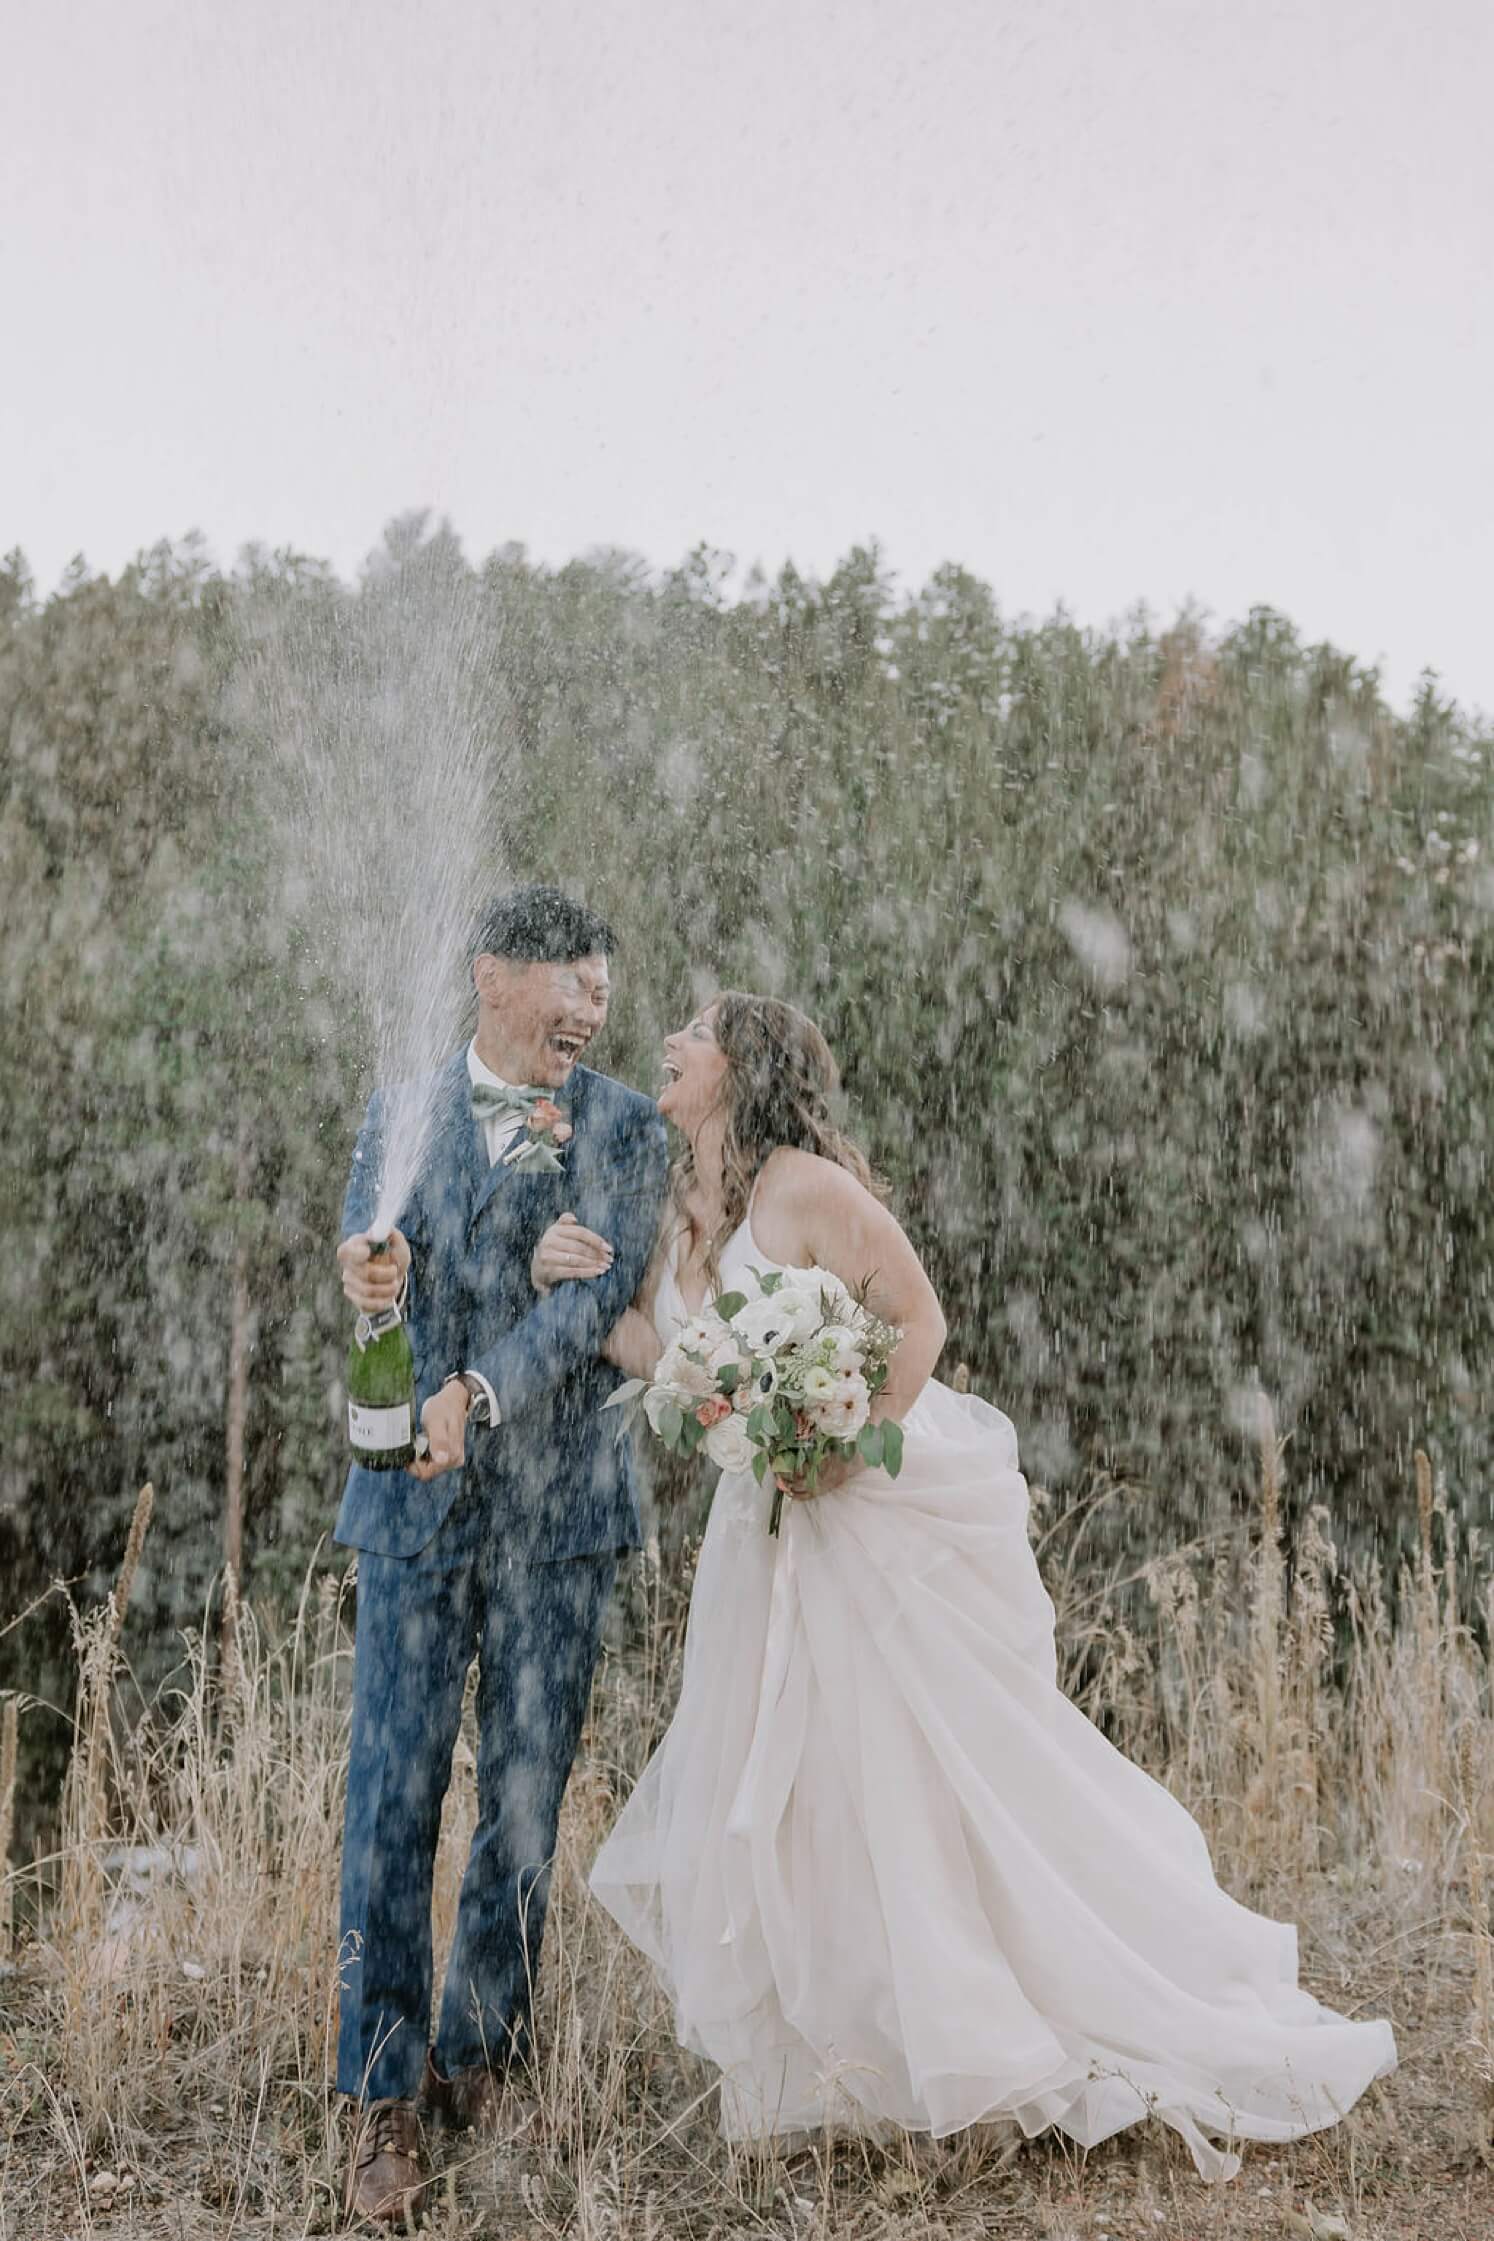 Bride and groom popping a bottle of champagne after Colorado elopement | McArthur Weddings and Events